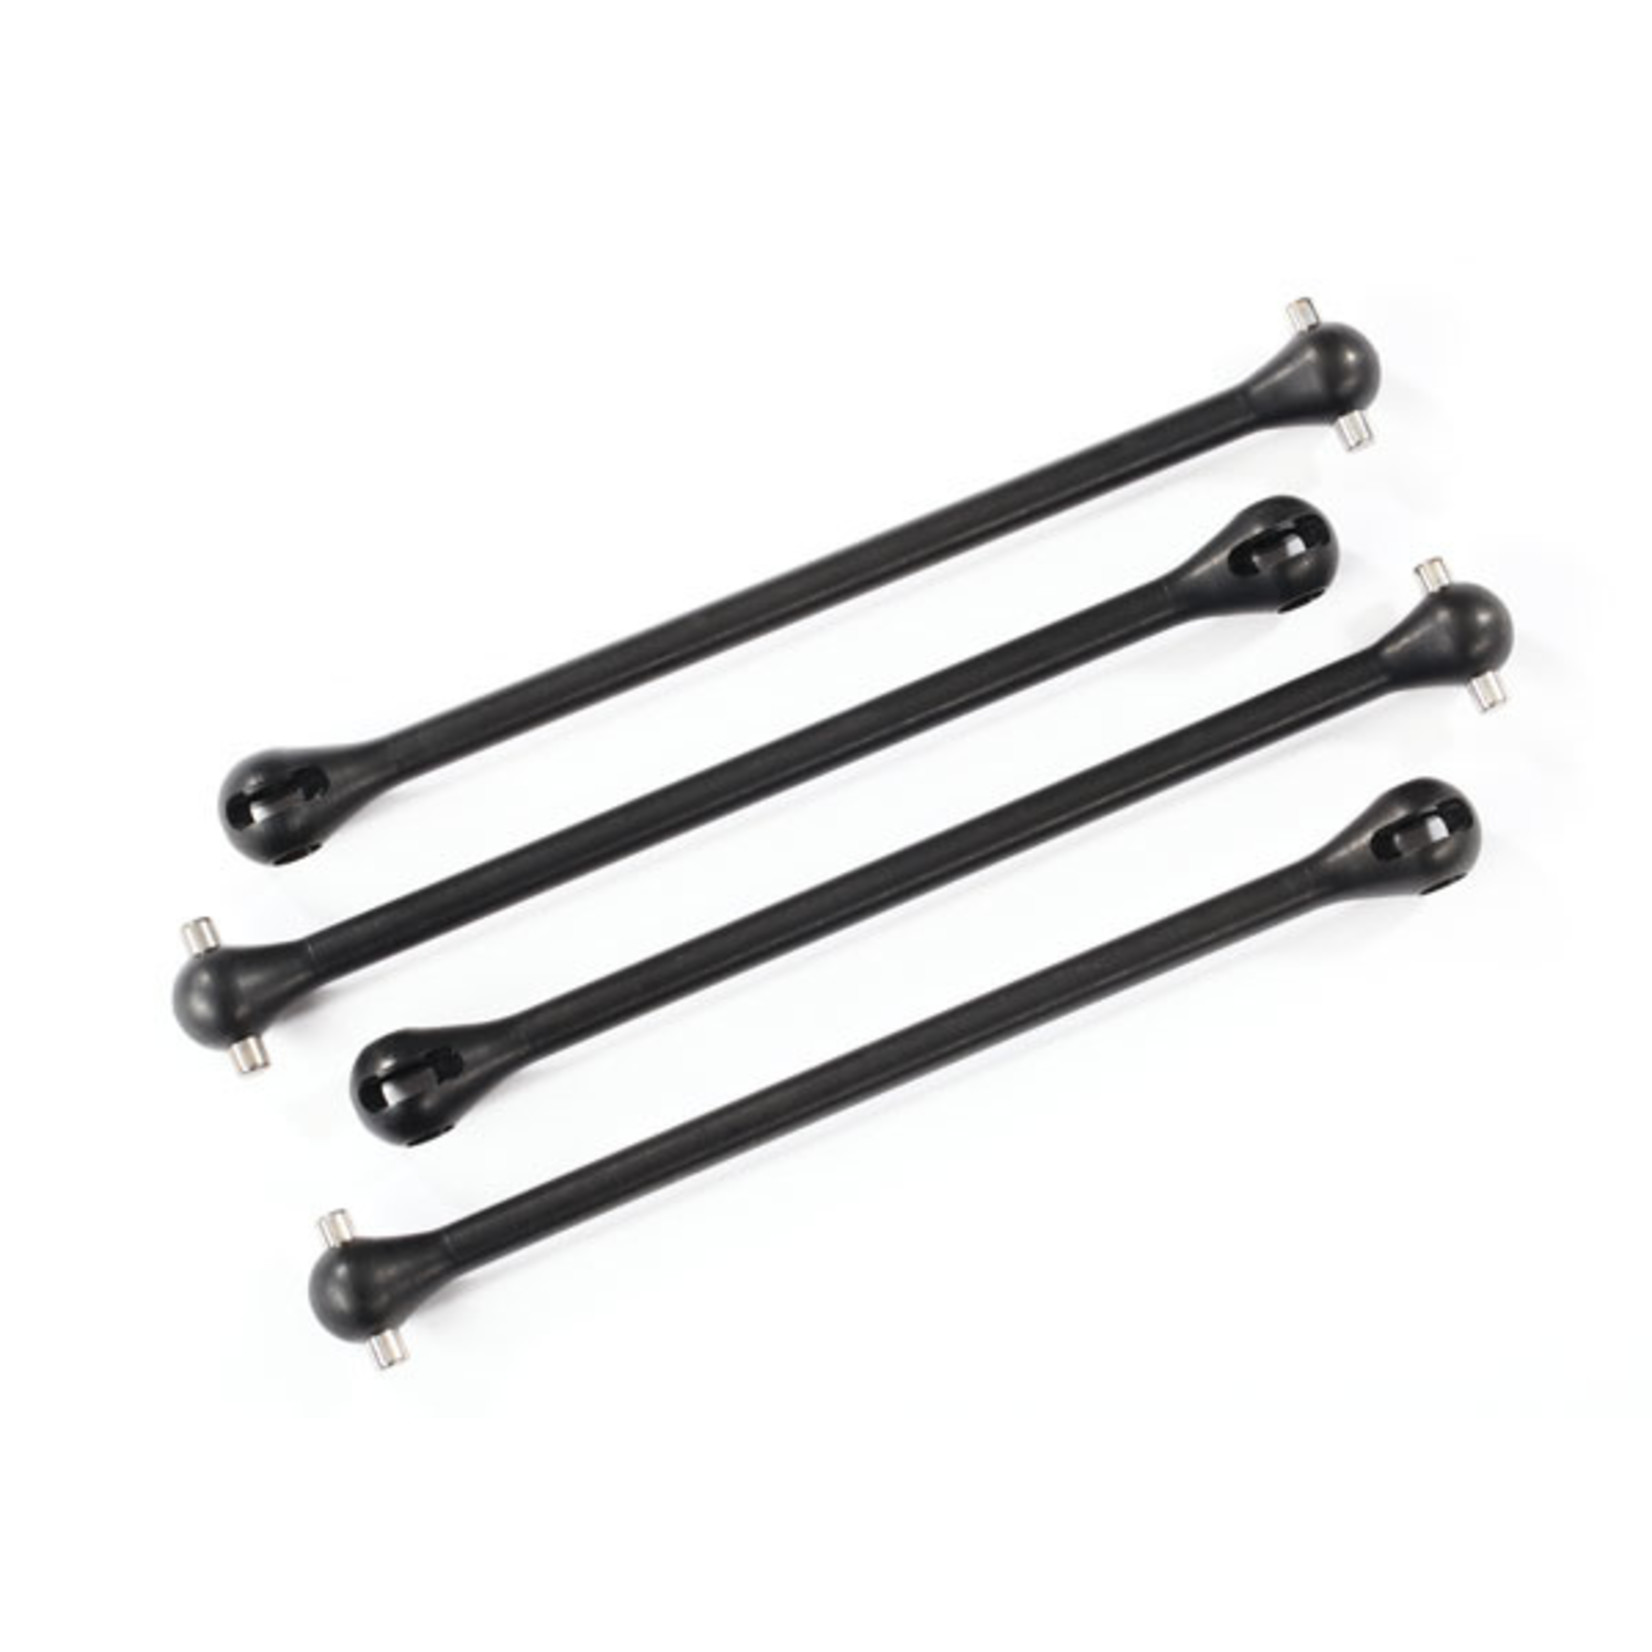 Traxxas 8996A - Driveshaft, steel constant-velocity (shaft